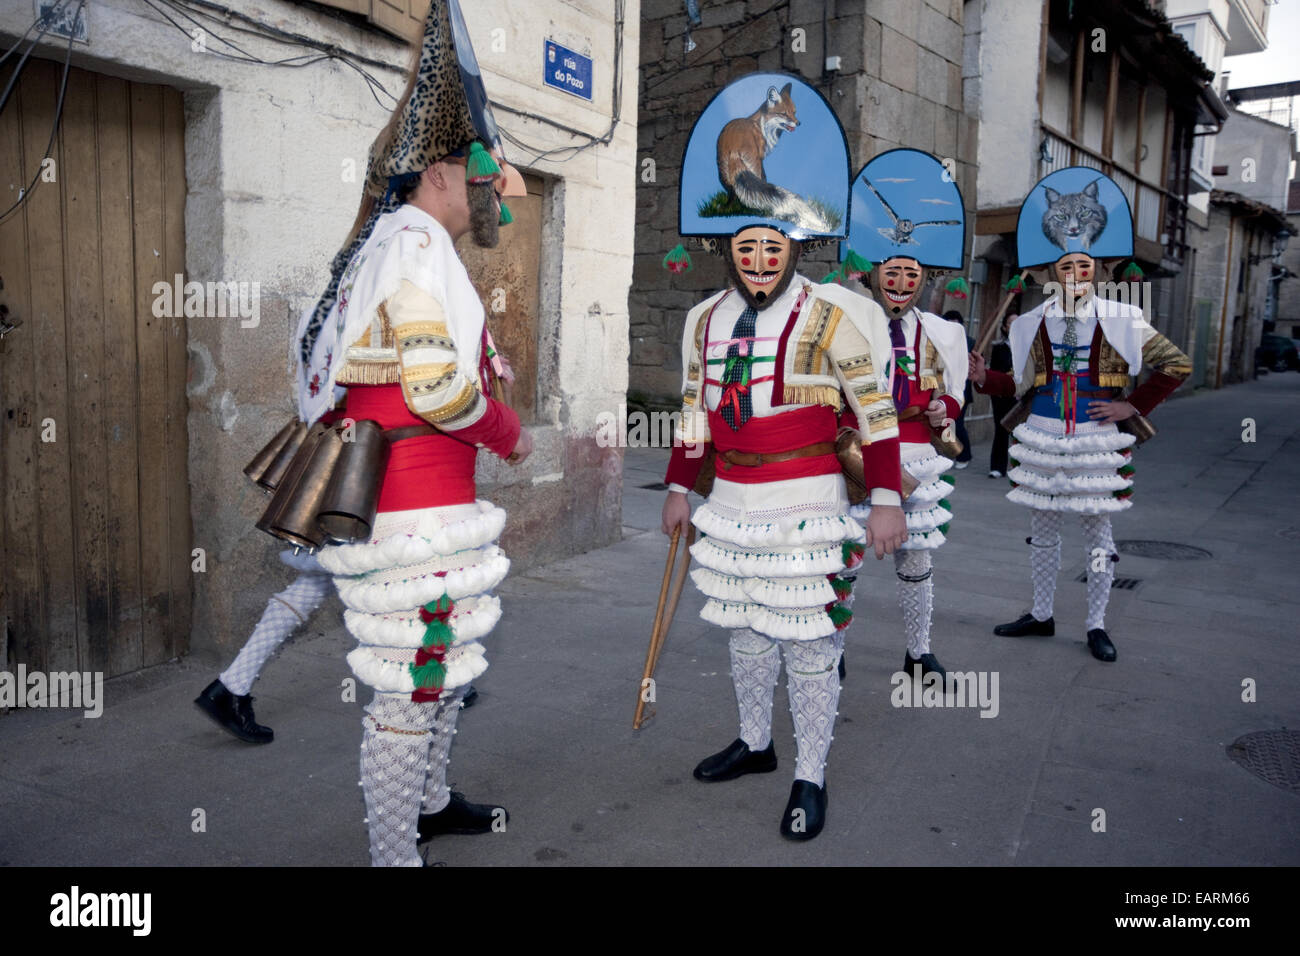 Several 'Cigarrons' typical characters of the Galician carnival march through the city during Carnival Saturday. Stock Photo